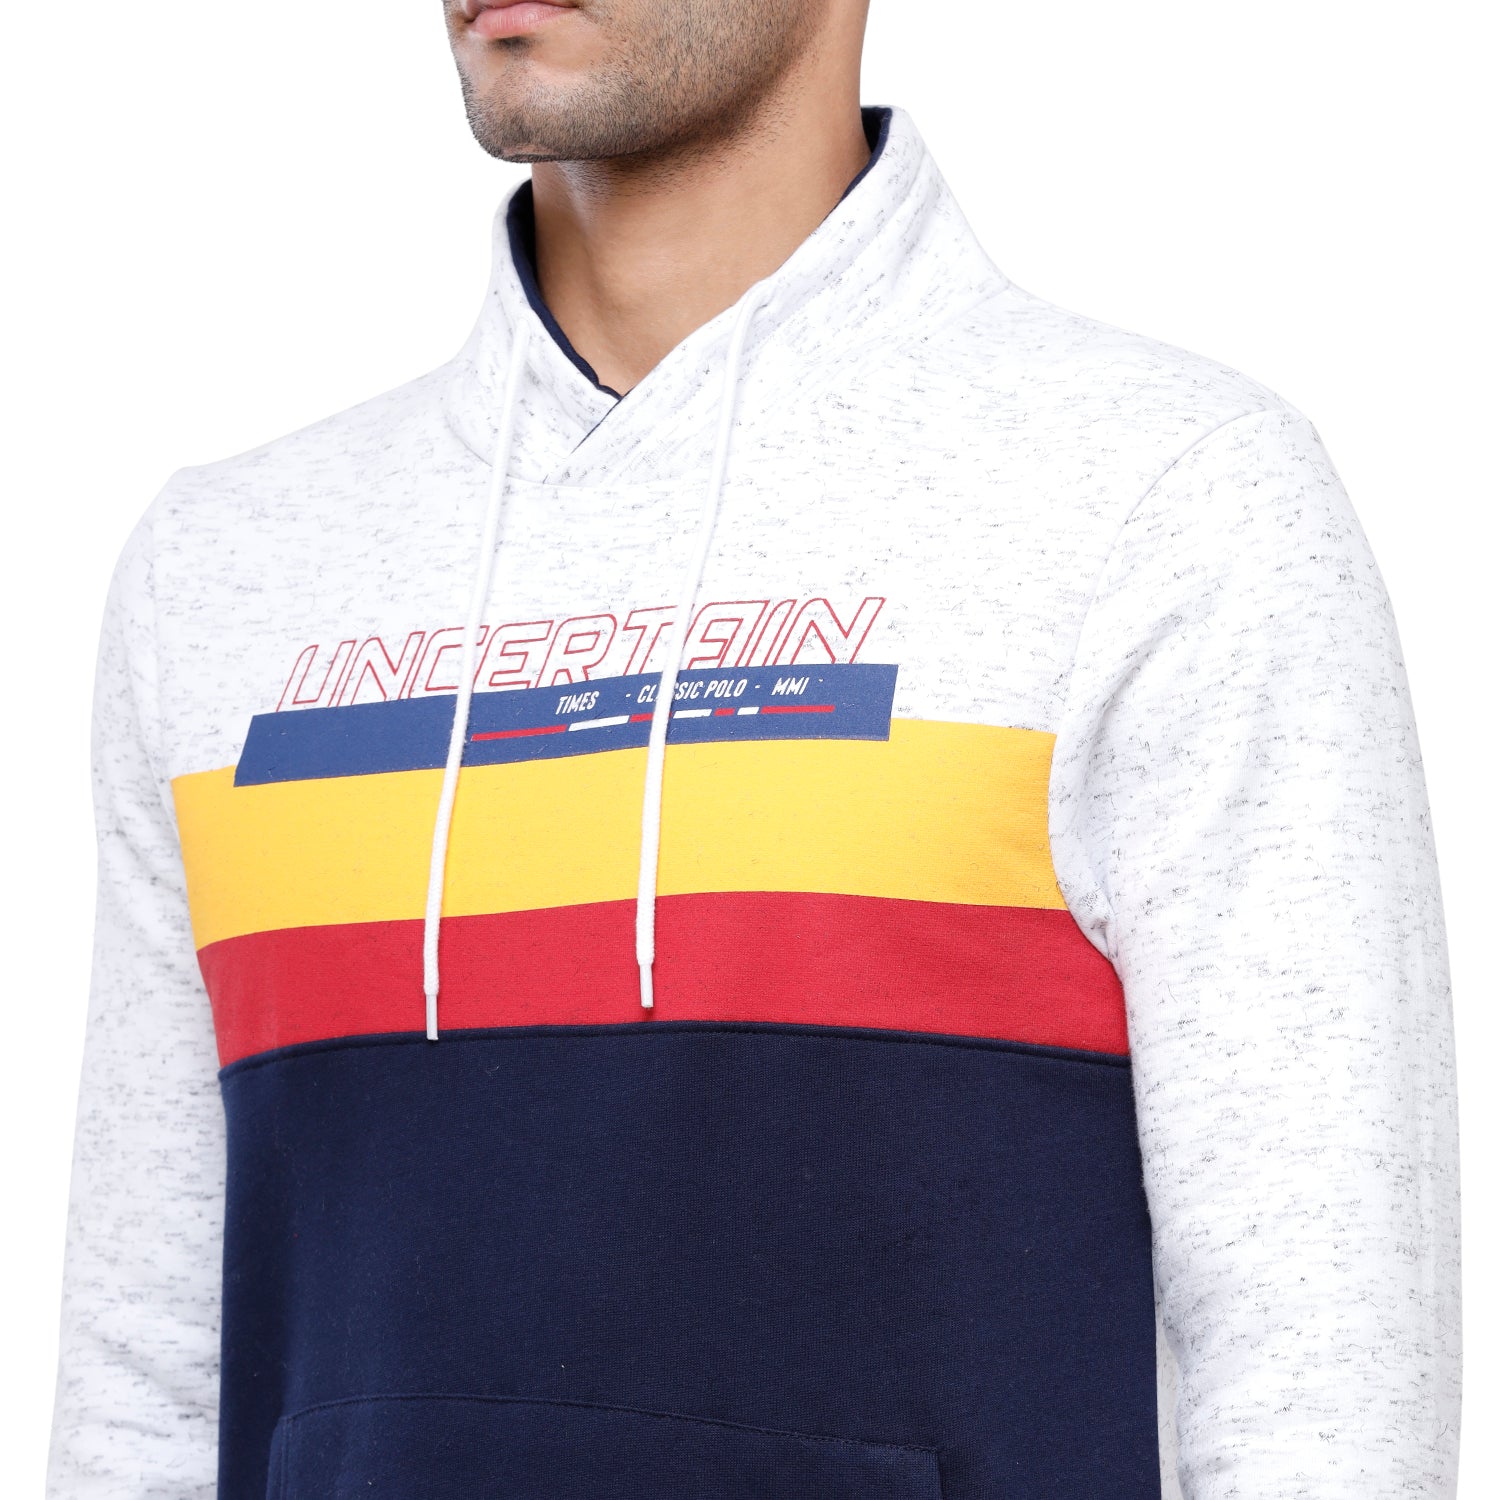 Classic Polo Men's Color Block Full Sleeve White & Navy H Neck Sweat Shirt - CPSS-324 A Sweat Shirts Classic Polo 